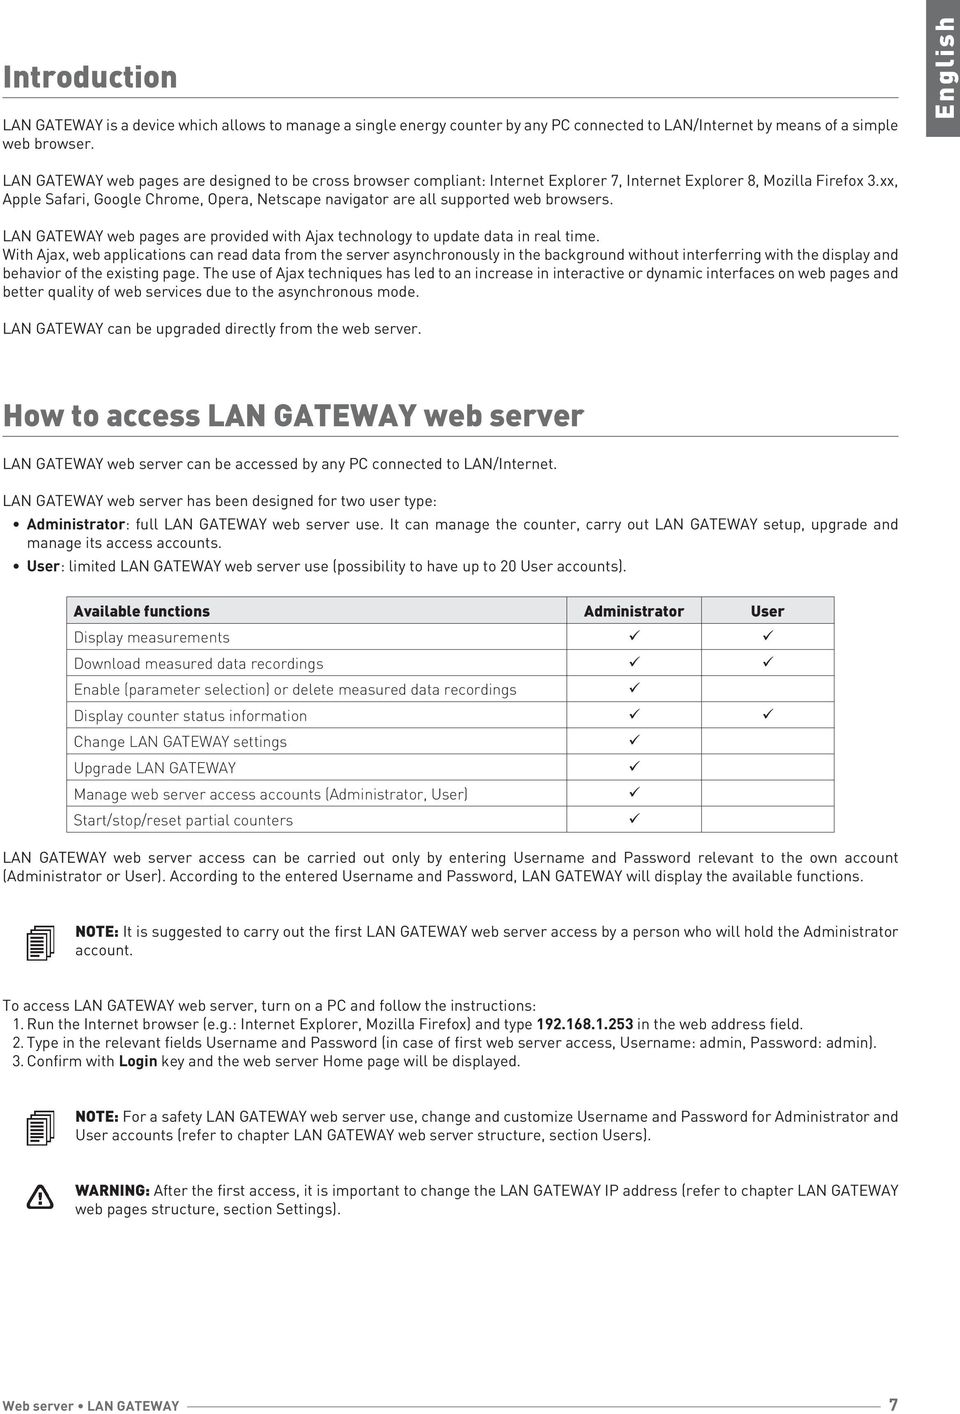 xx, Apple Safari, Google Chrome, Opera, Netscape navigator are all supported web browsers. LAN GATEWAY web pages are provided with Ajax technology to update data in real time.